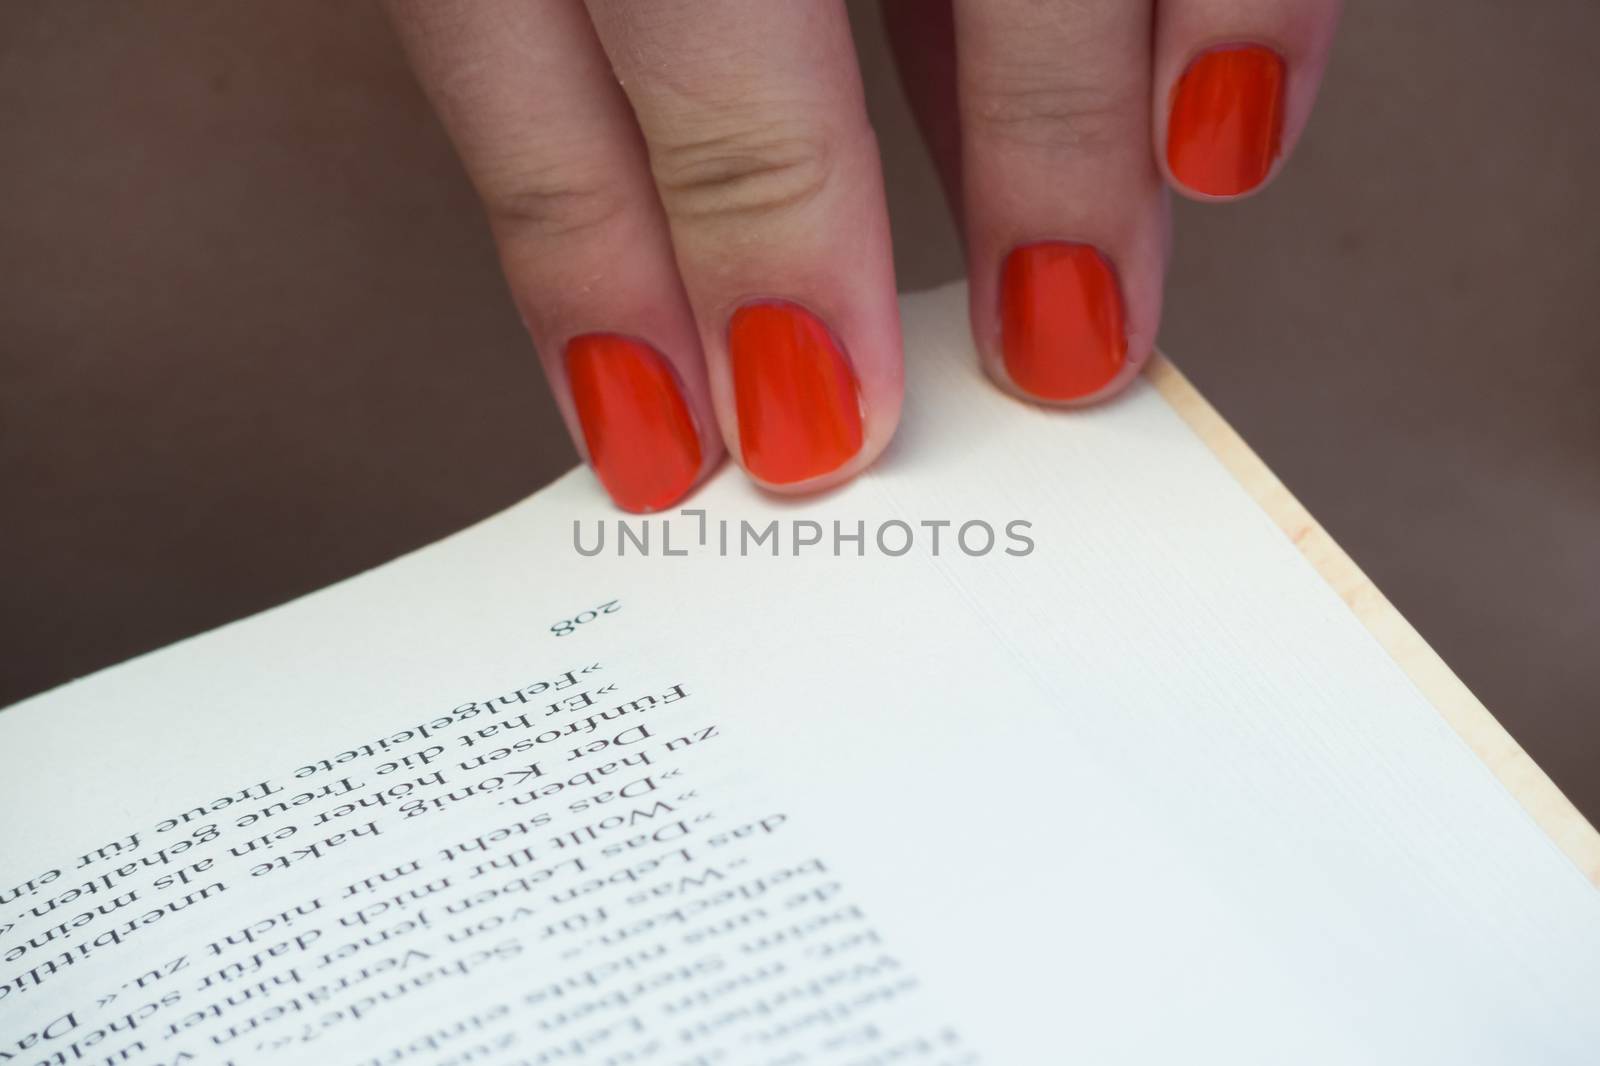 Changing page of book with orange fingernails by MXW_Stock